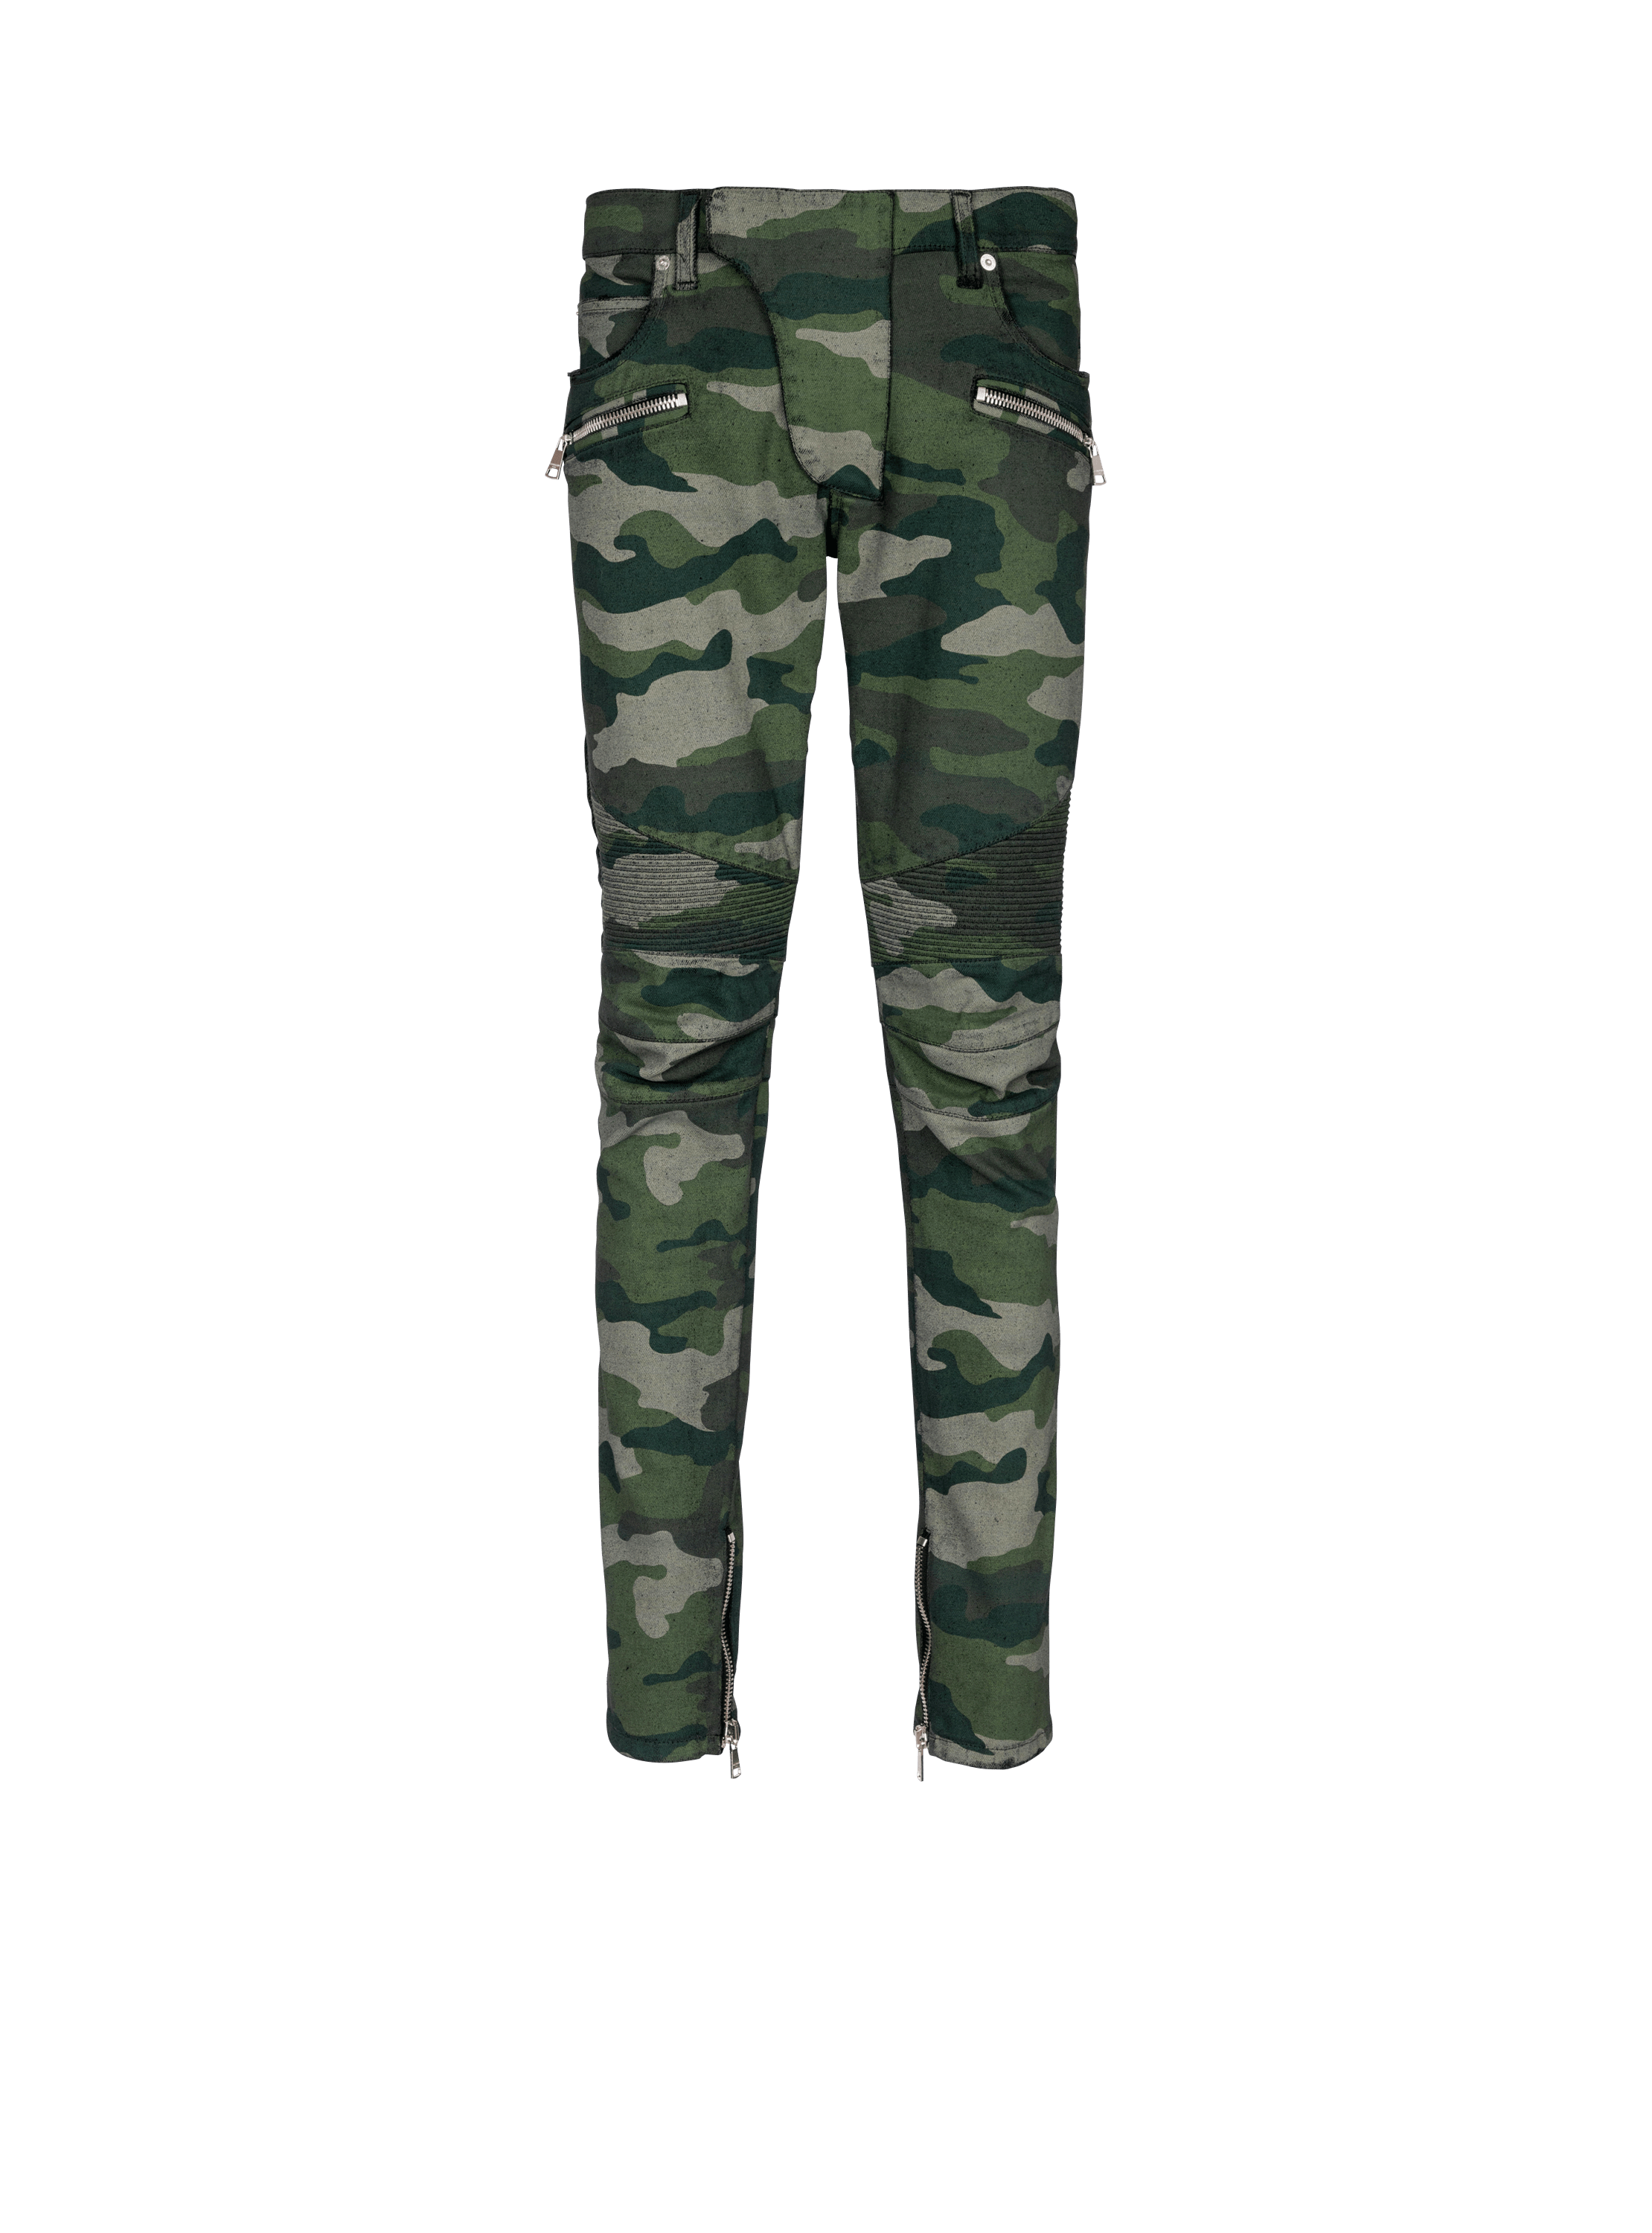 Slim-fit jeans in Camouflage denim with ribbed details